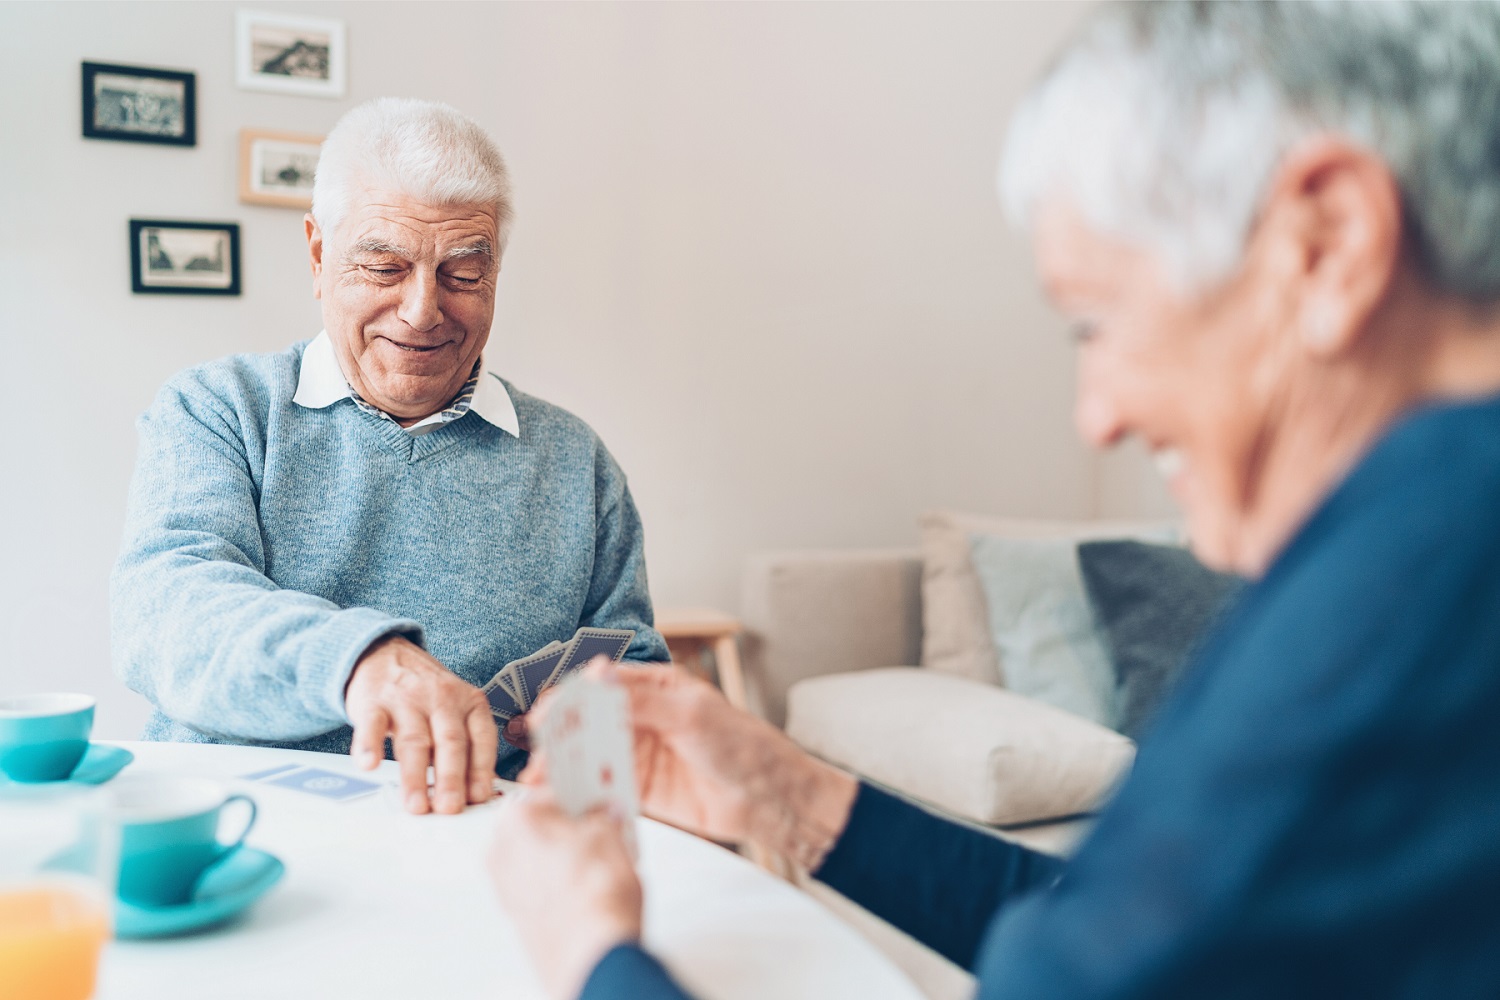 What are the benefits of senior living vs. staying at home